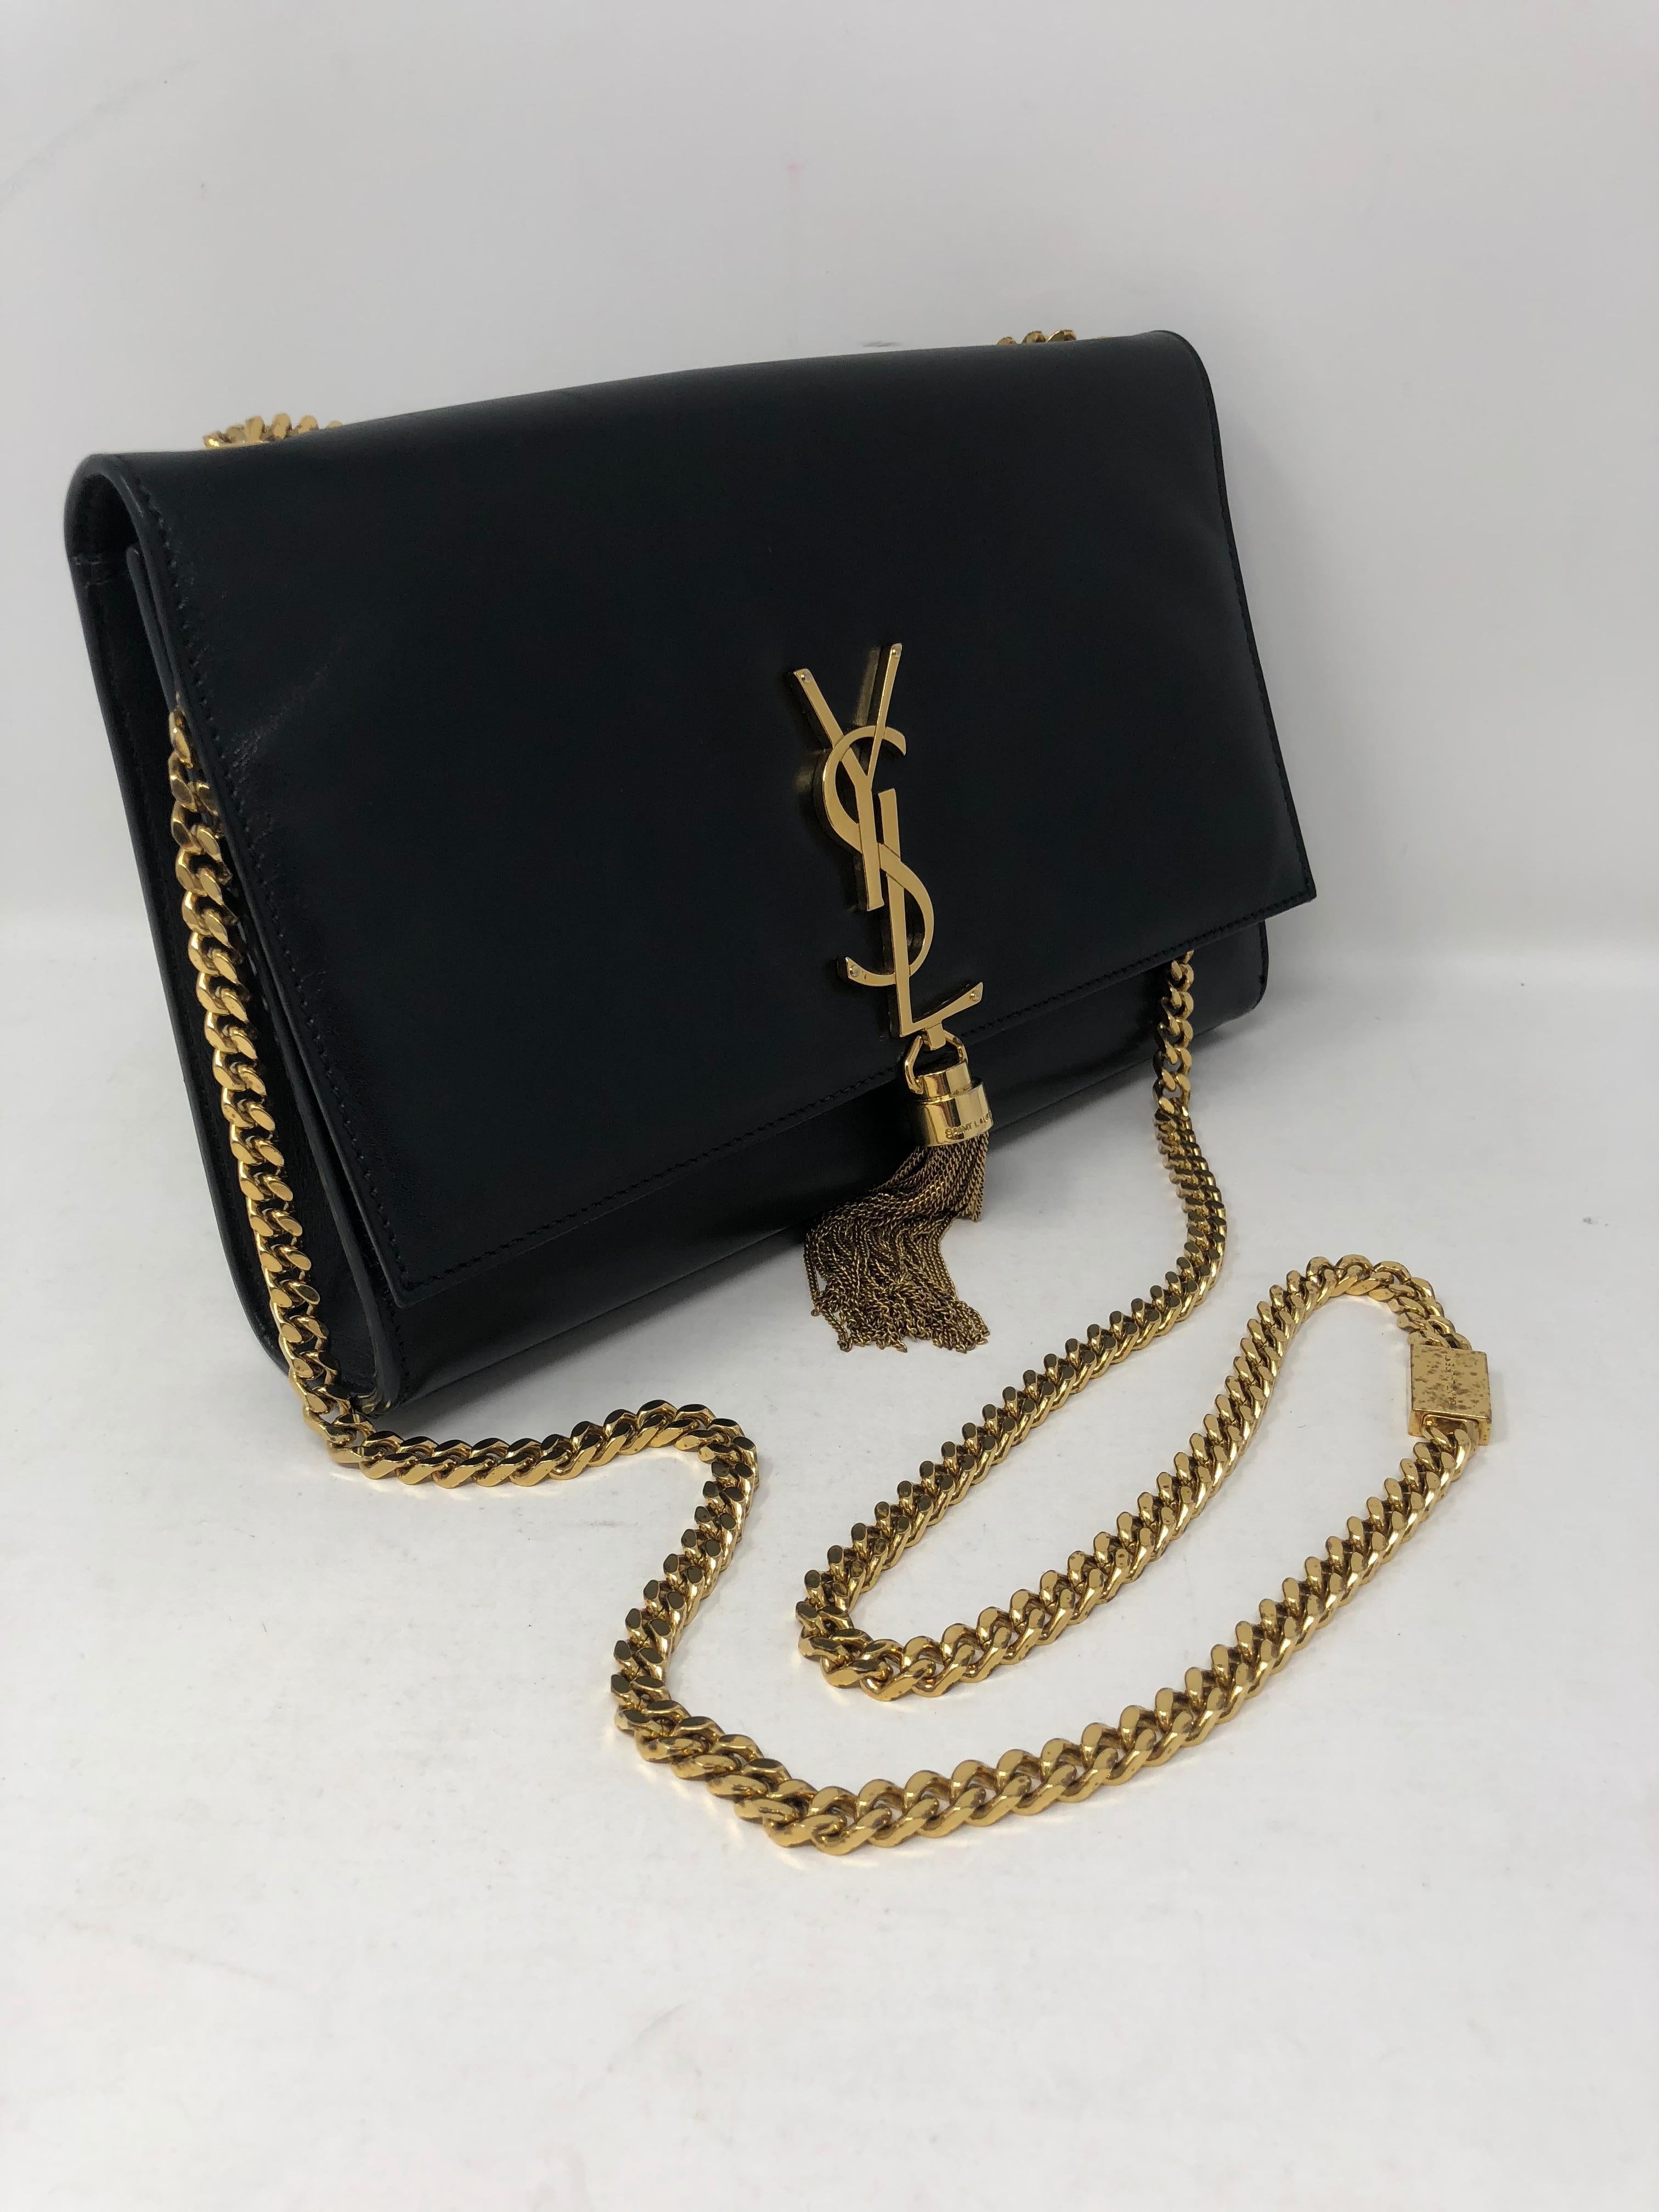 YSL Black Kate Bag with Fringe Tassel. Gold hardware. Beautiful clutch or crossbody bag. Guaranteed authentic. 